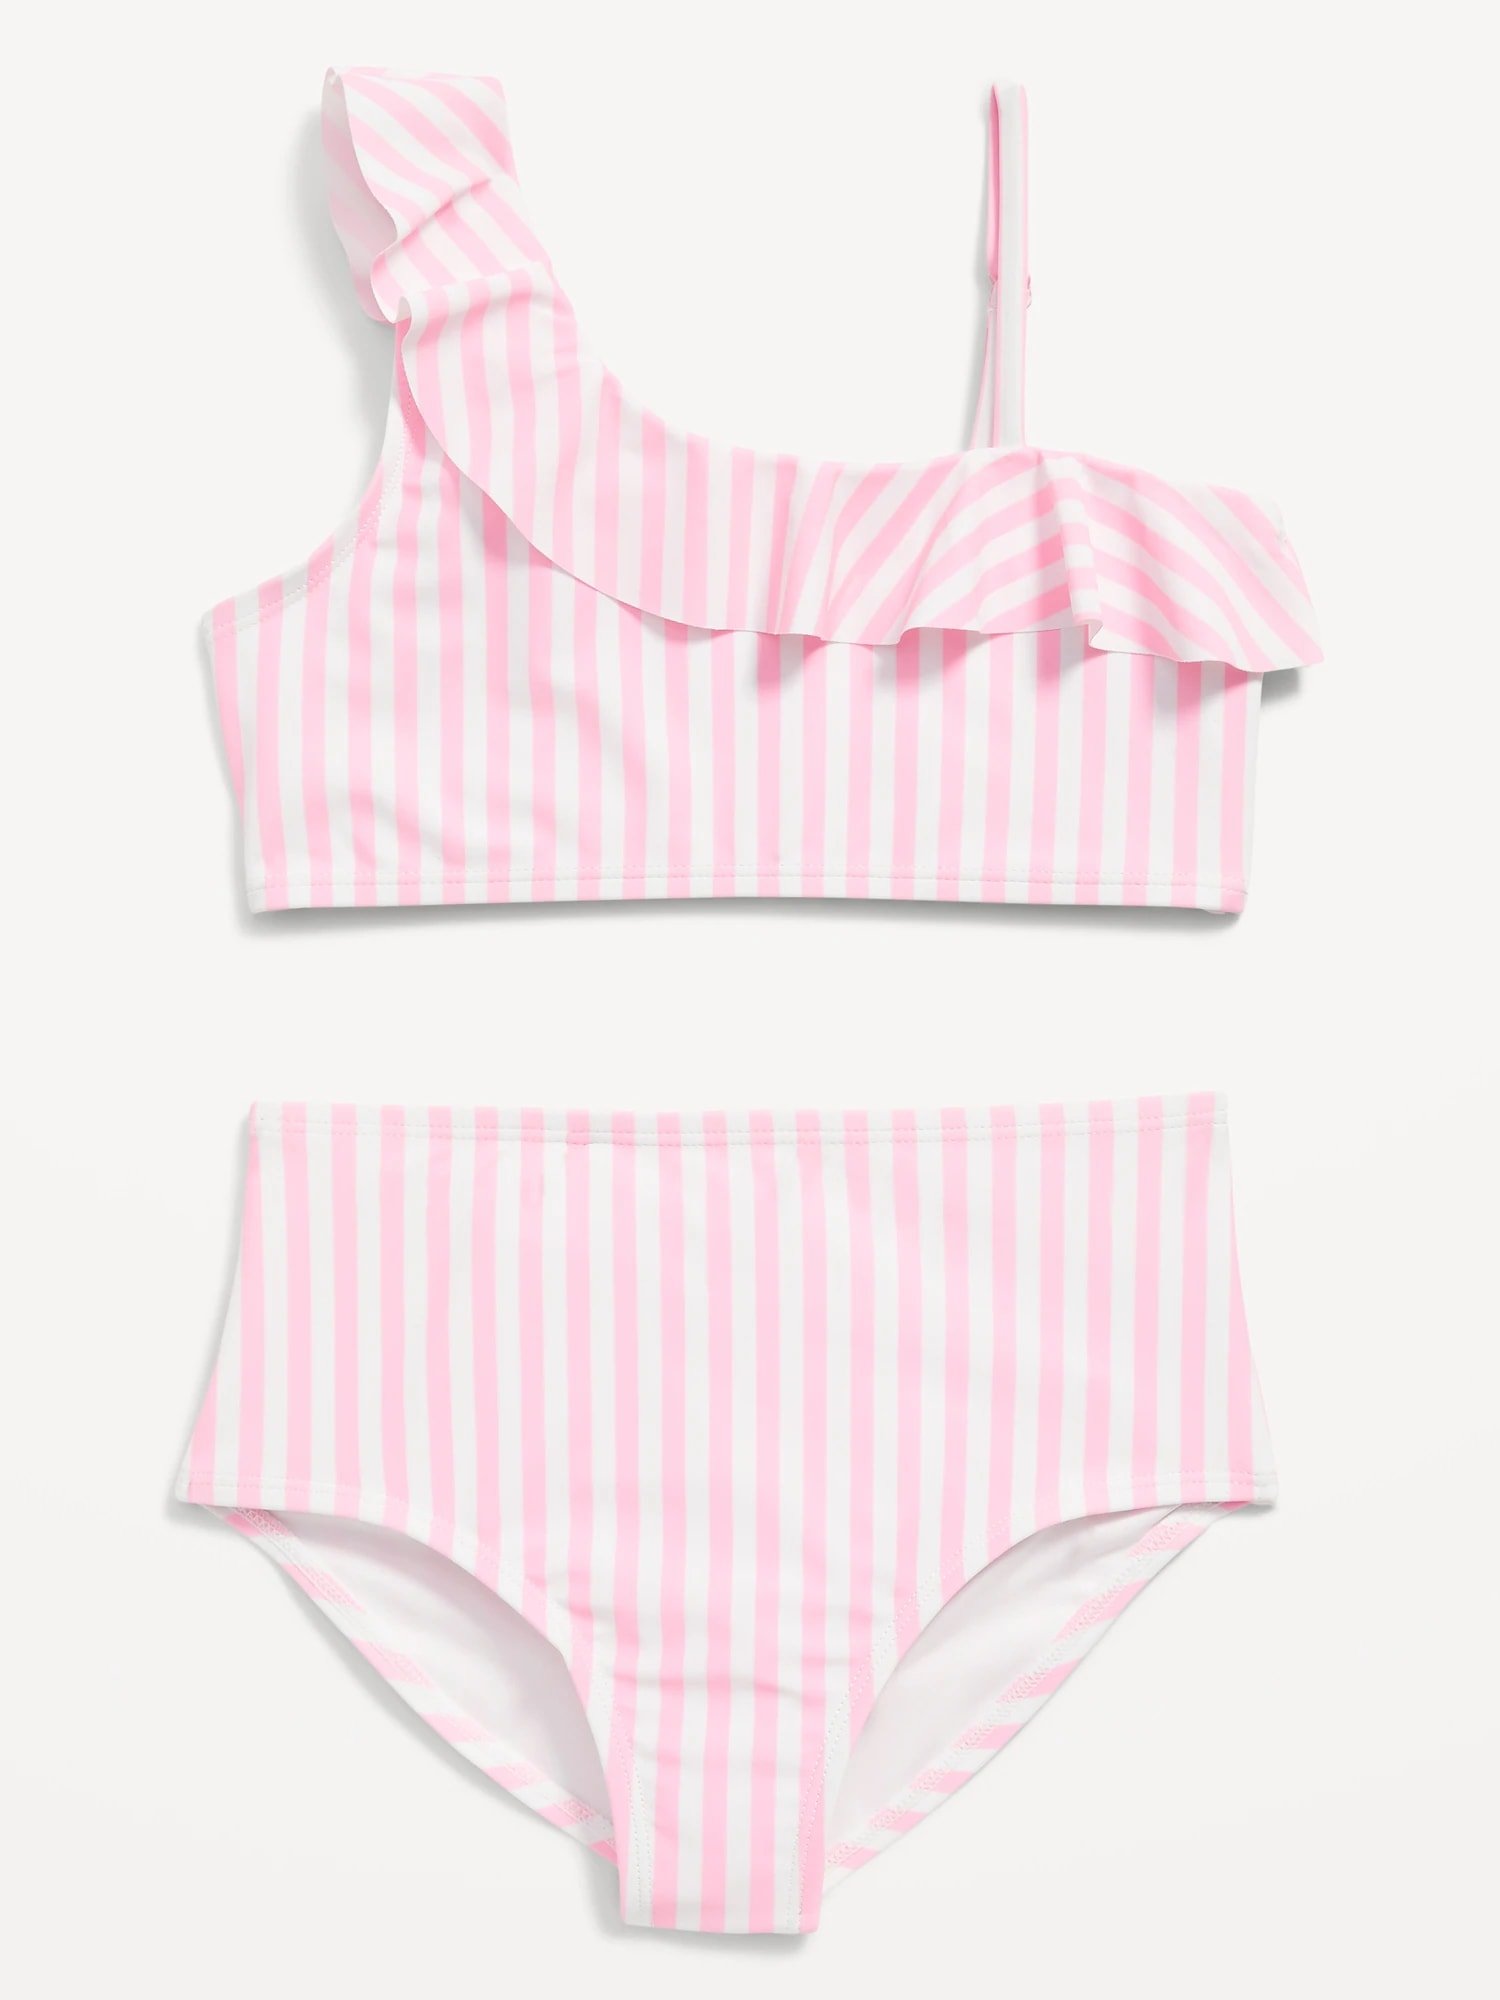 Two-piece pink and white stripe bathing suit